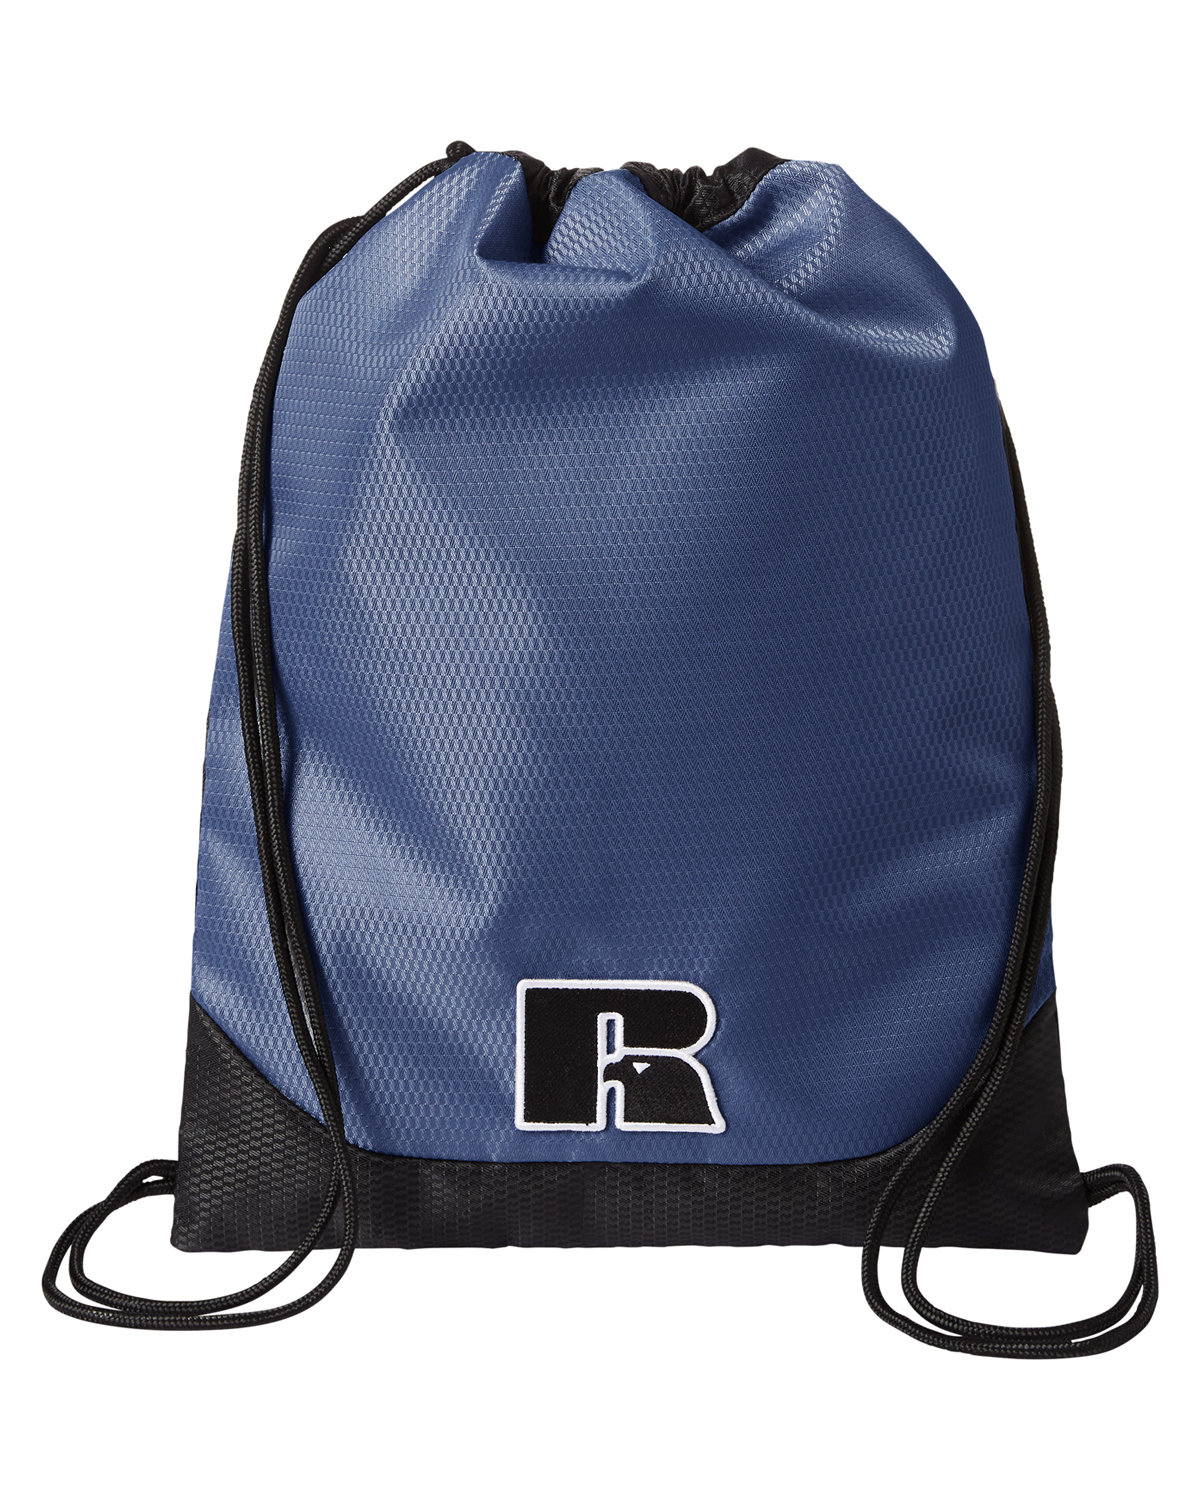 Lay-Up Carrysack-Russell Athletic